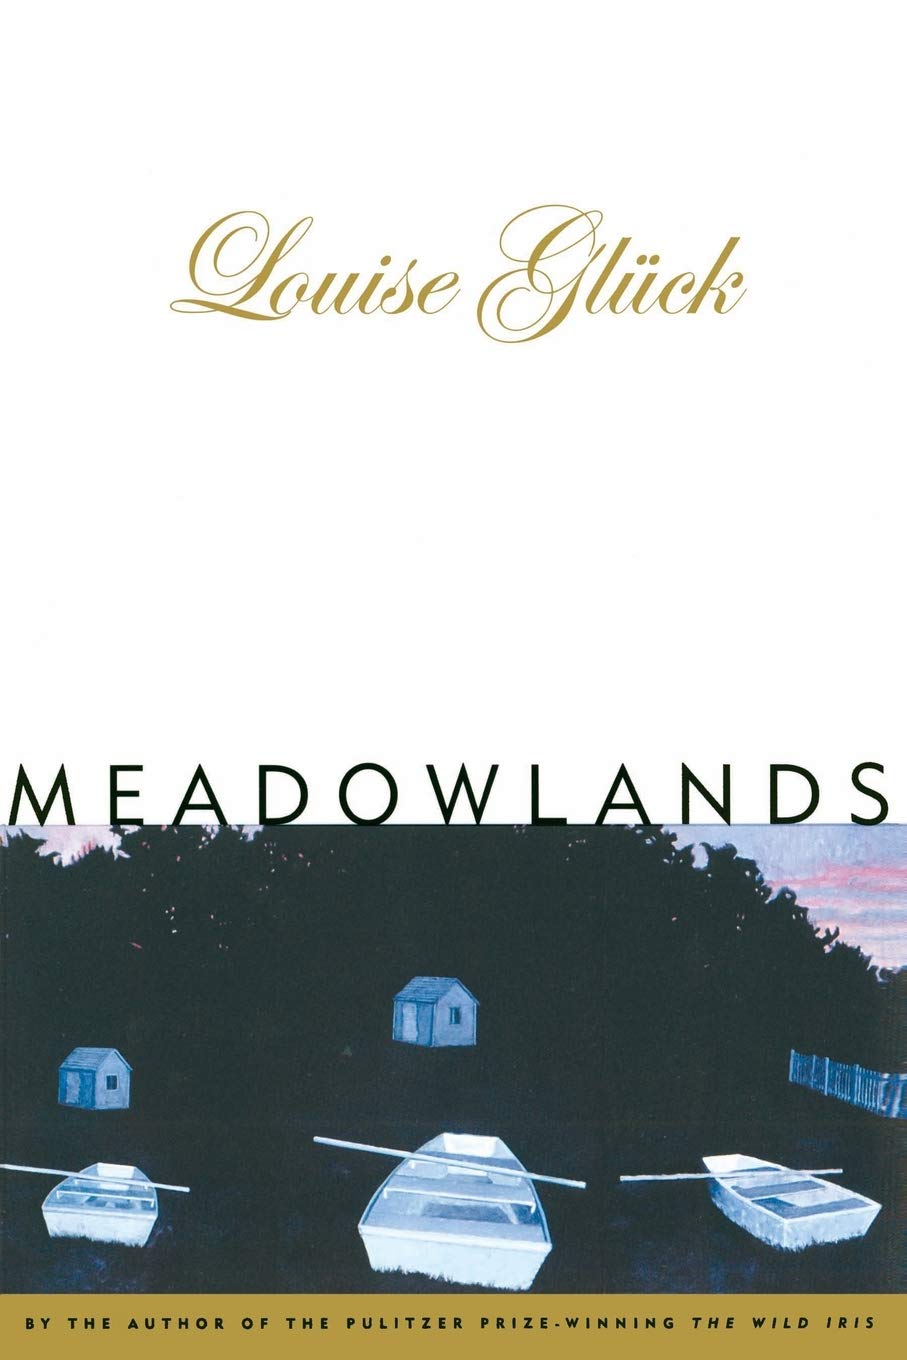 Meadowlands by Louise Gluck